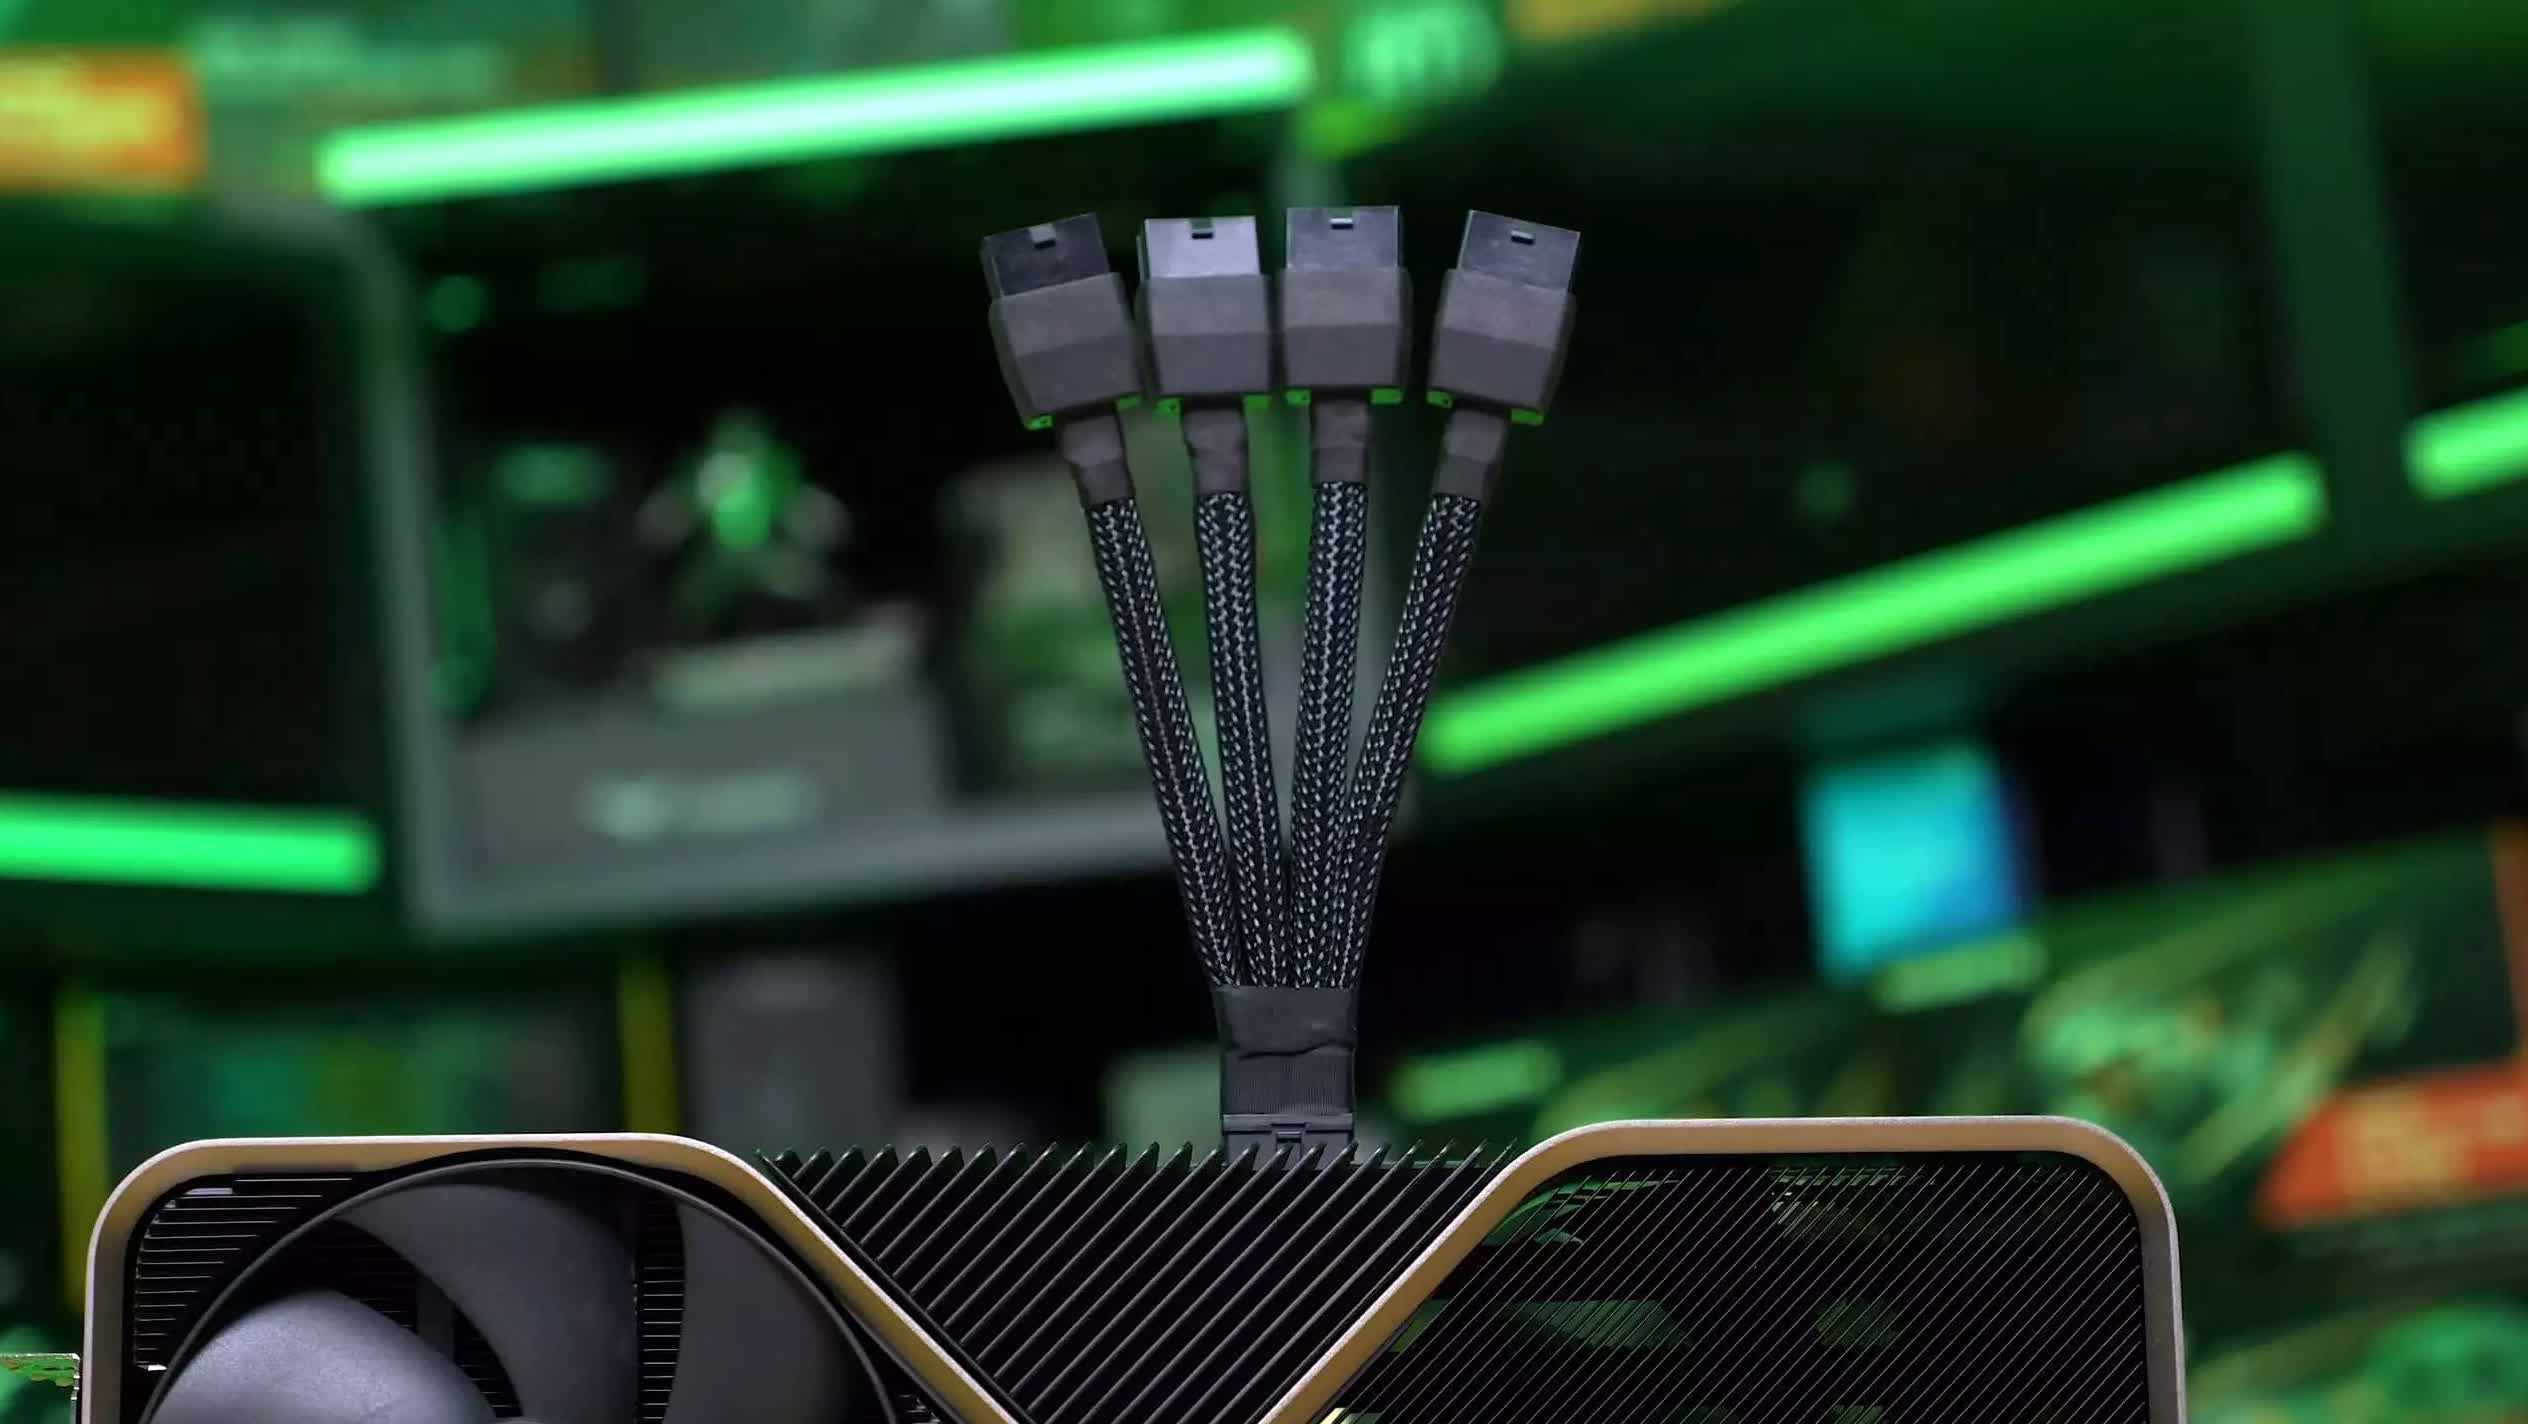 Nvidia is quietly upgrading GeForce RTX 4090 cards with a safer power connector